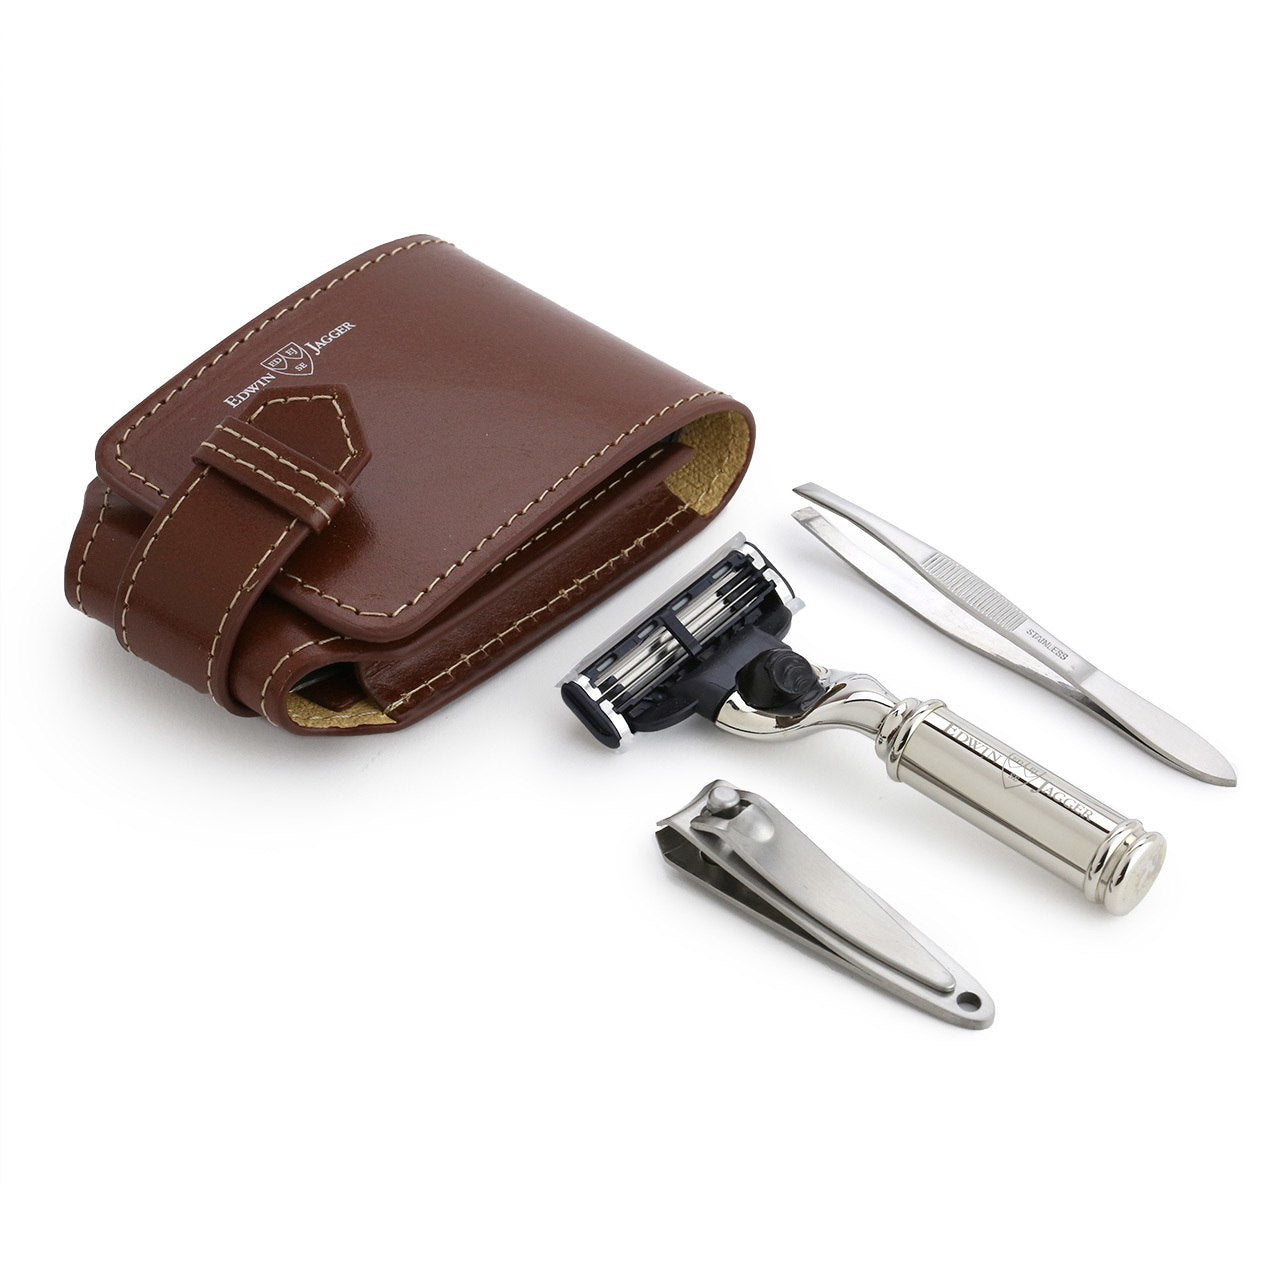 Edwin Jagger Travel set, Mach3 razor, fingernail clippers and tweezers in a brown leather case